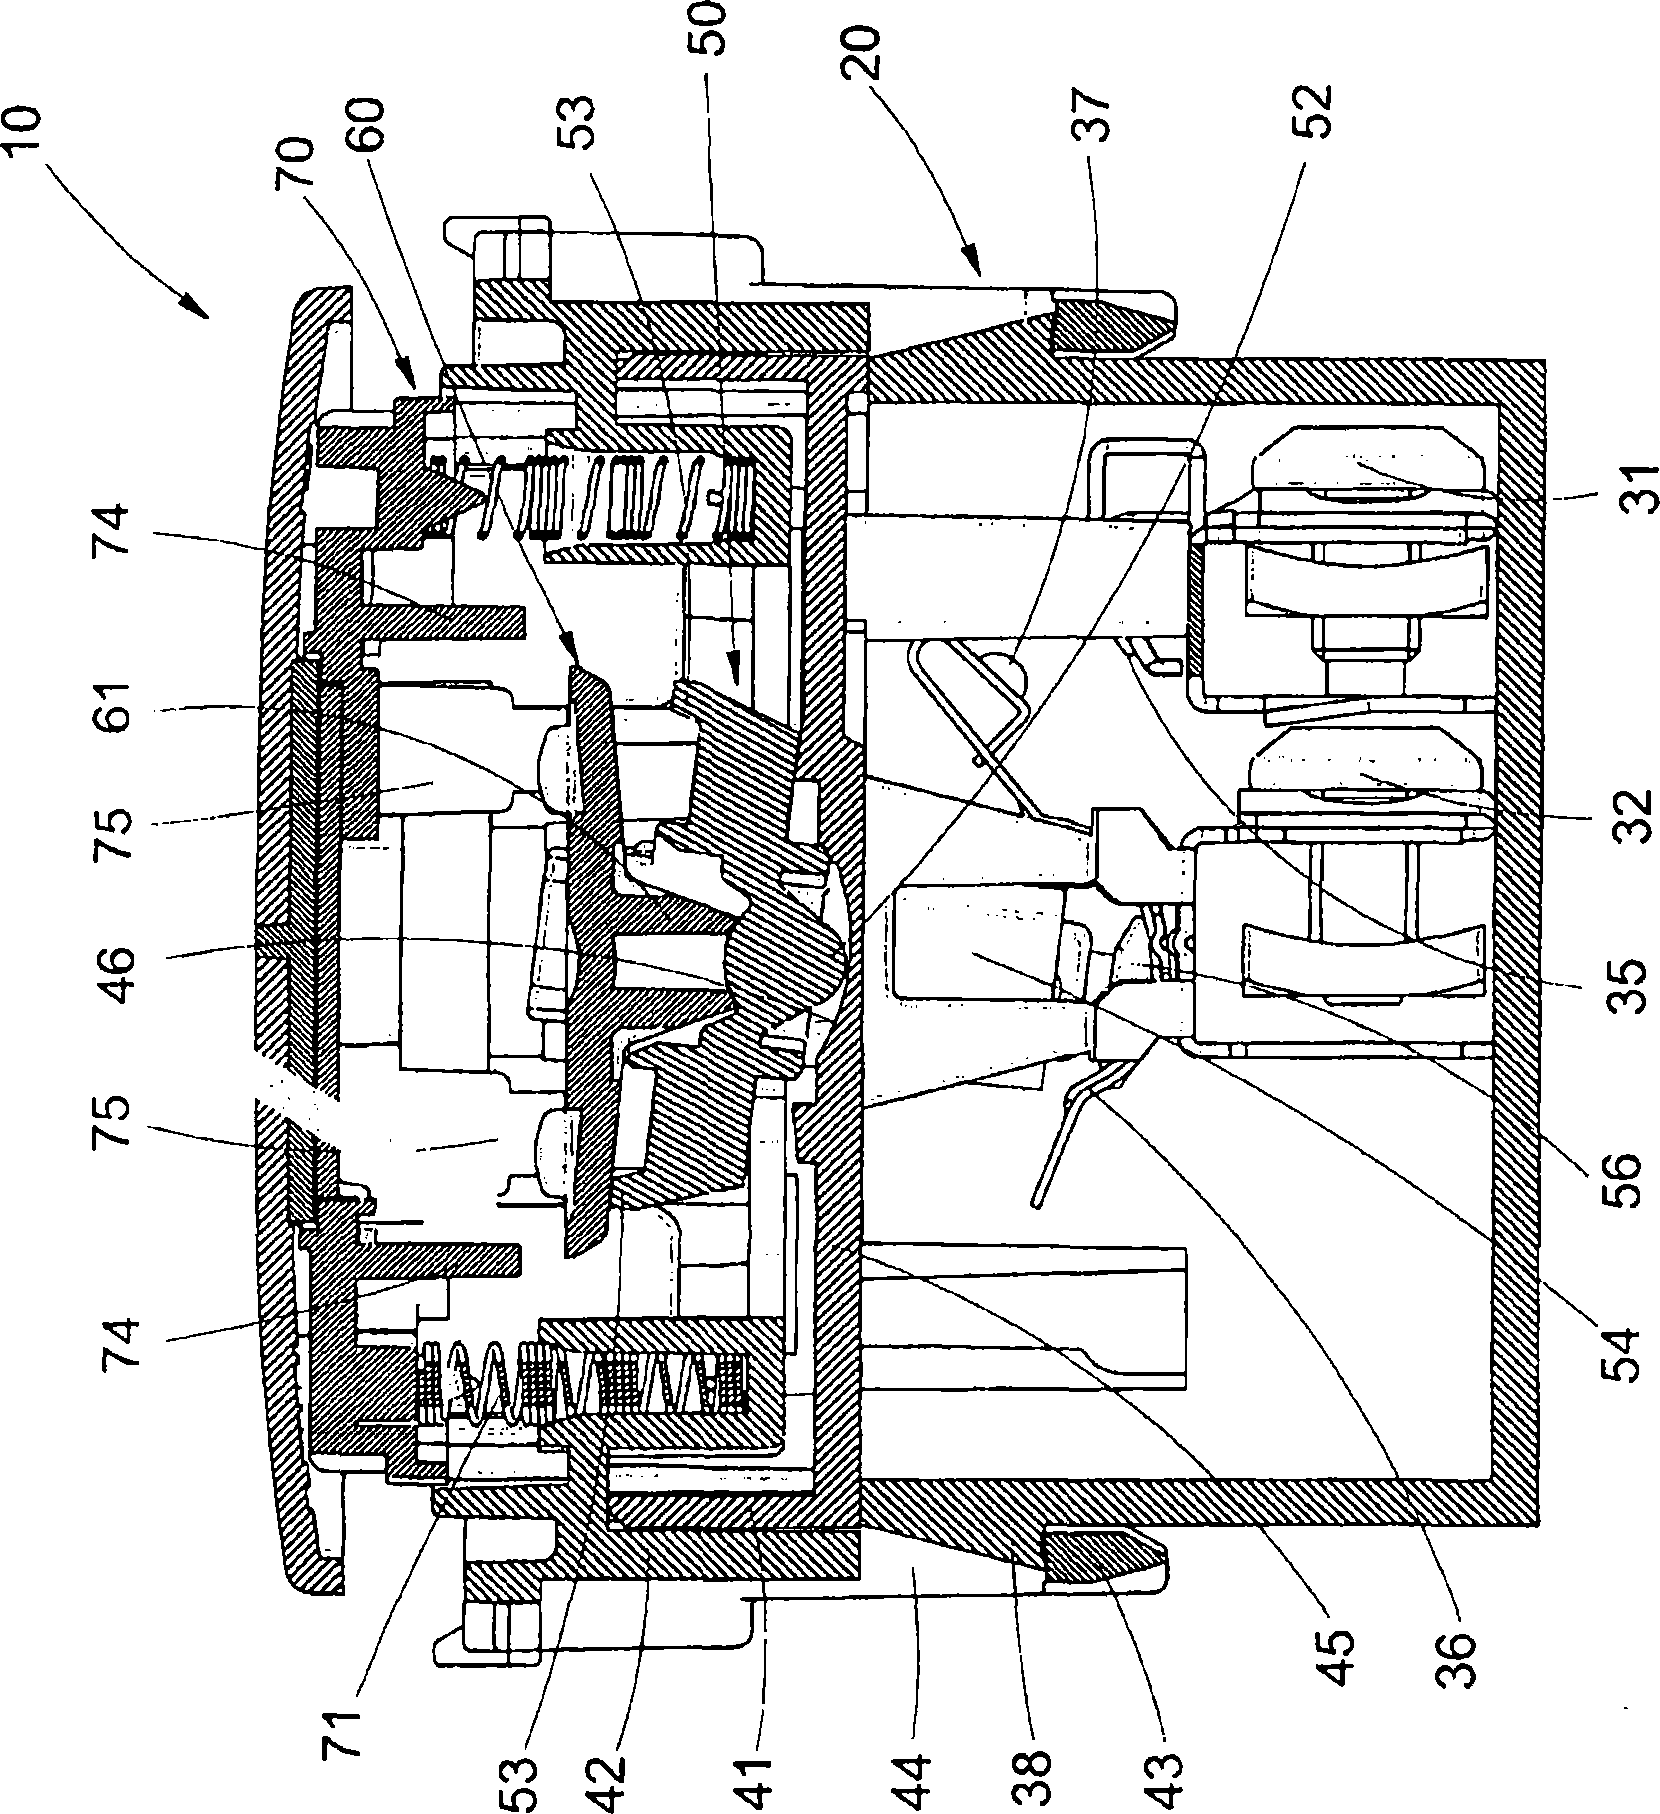 Electrical device with axial control